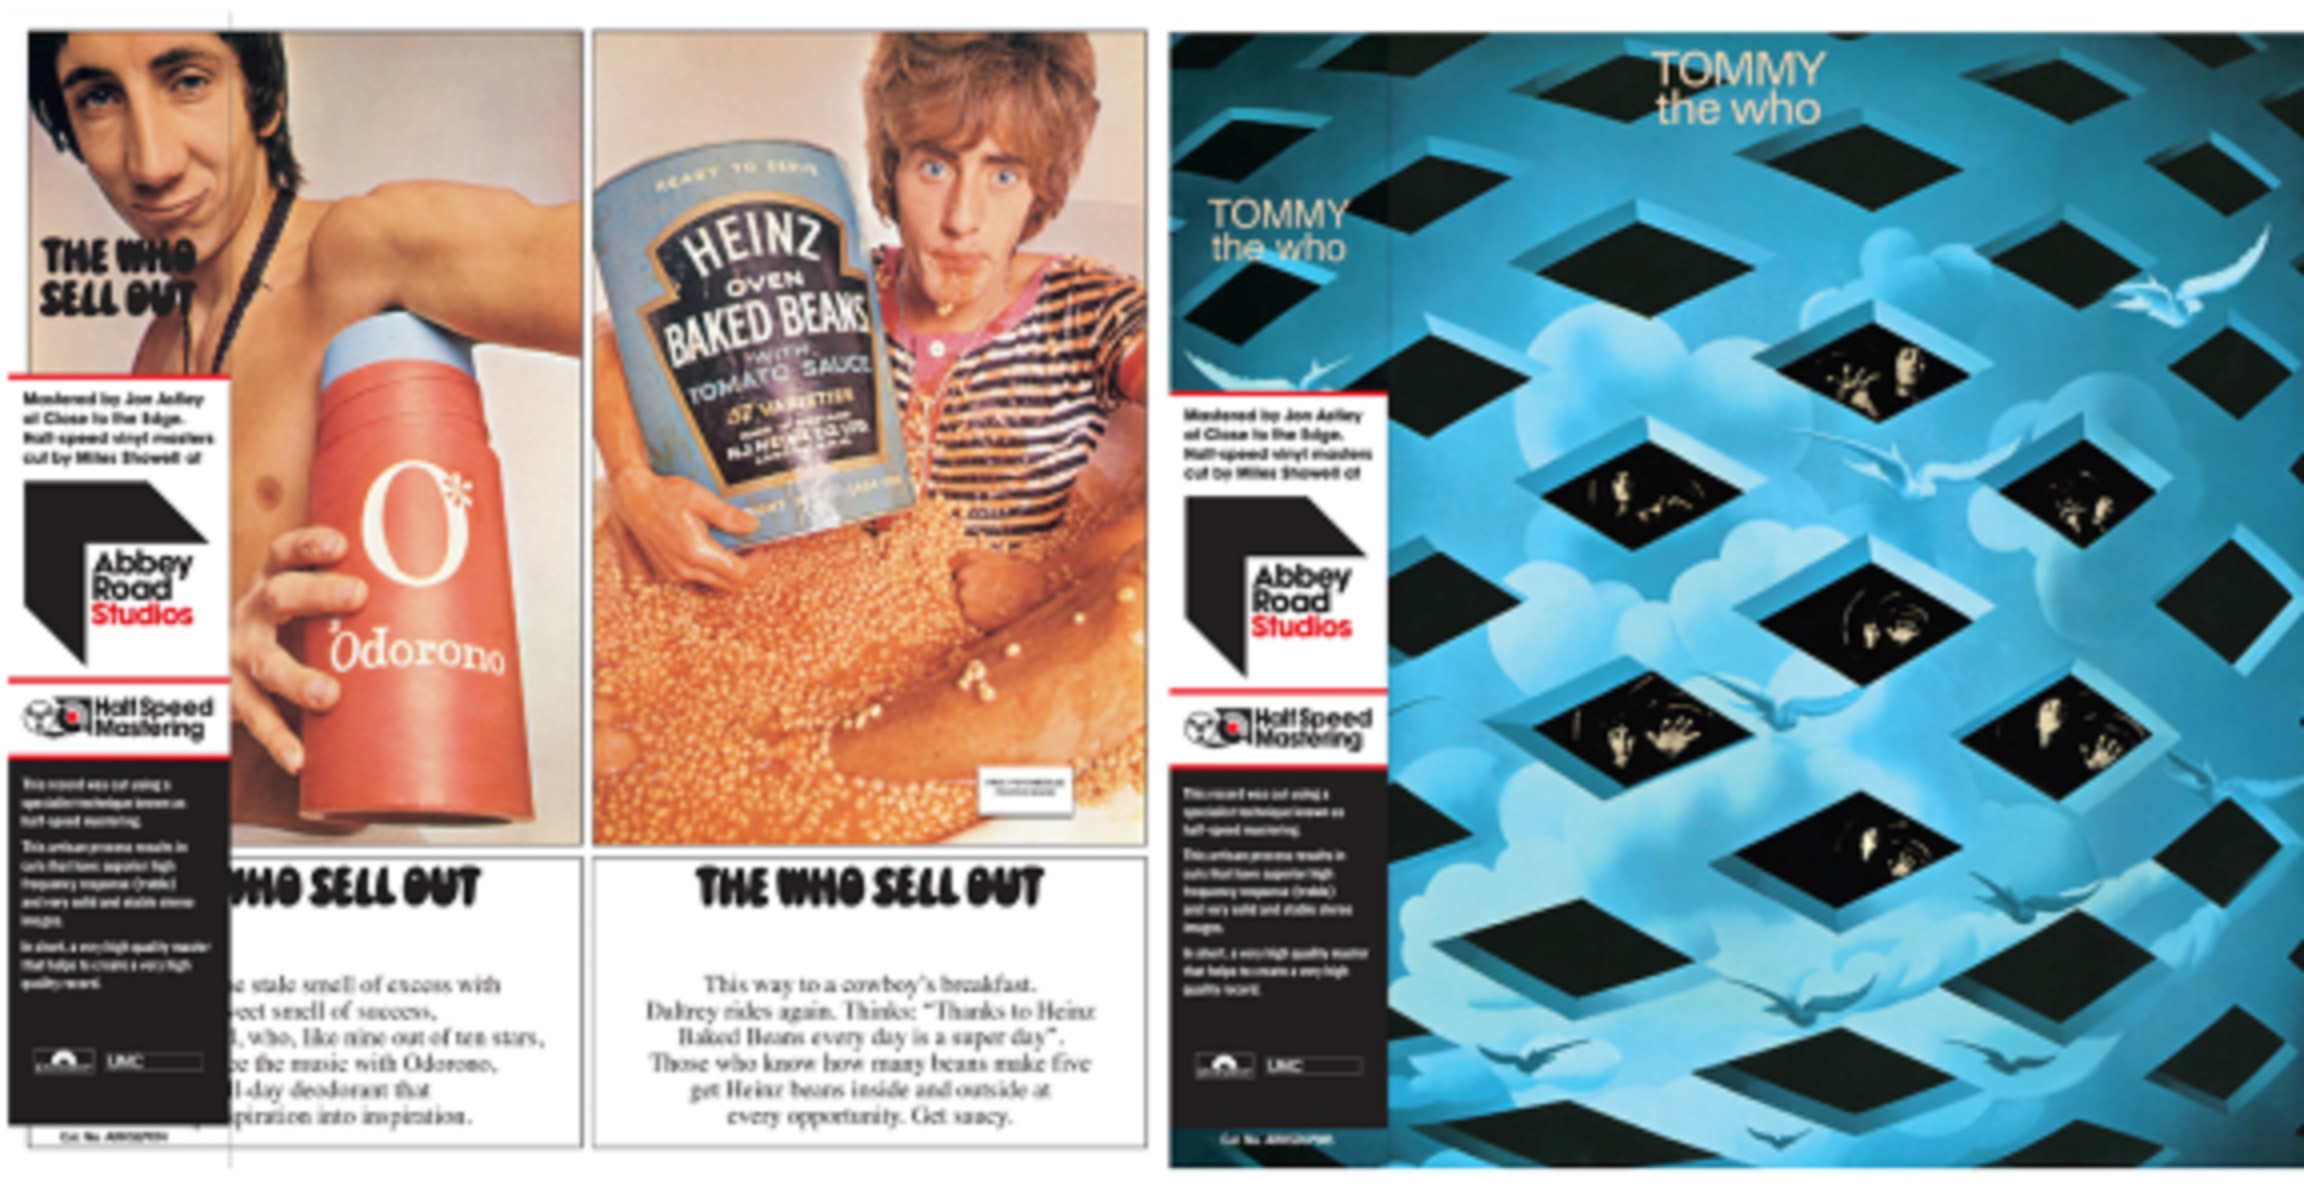 THE WHO - THE SECOND IN A SERIES OF NEW LIMITED EDITION HALF SPEED MASTERED ALBUMS 'THE WHO SELL OUT' & 'TOMMY' OUT NOW!